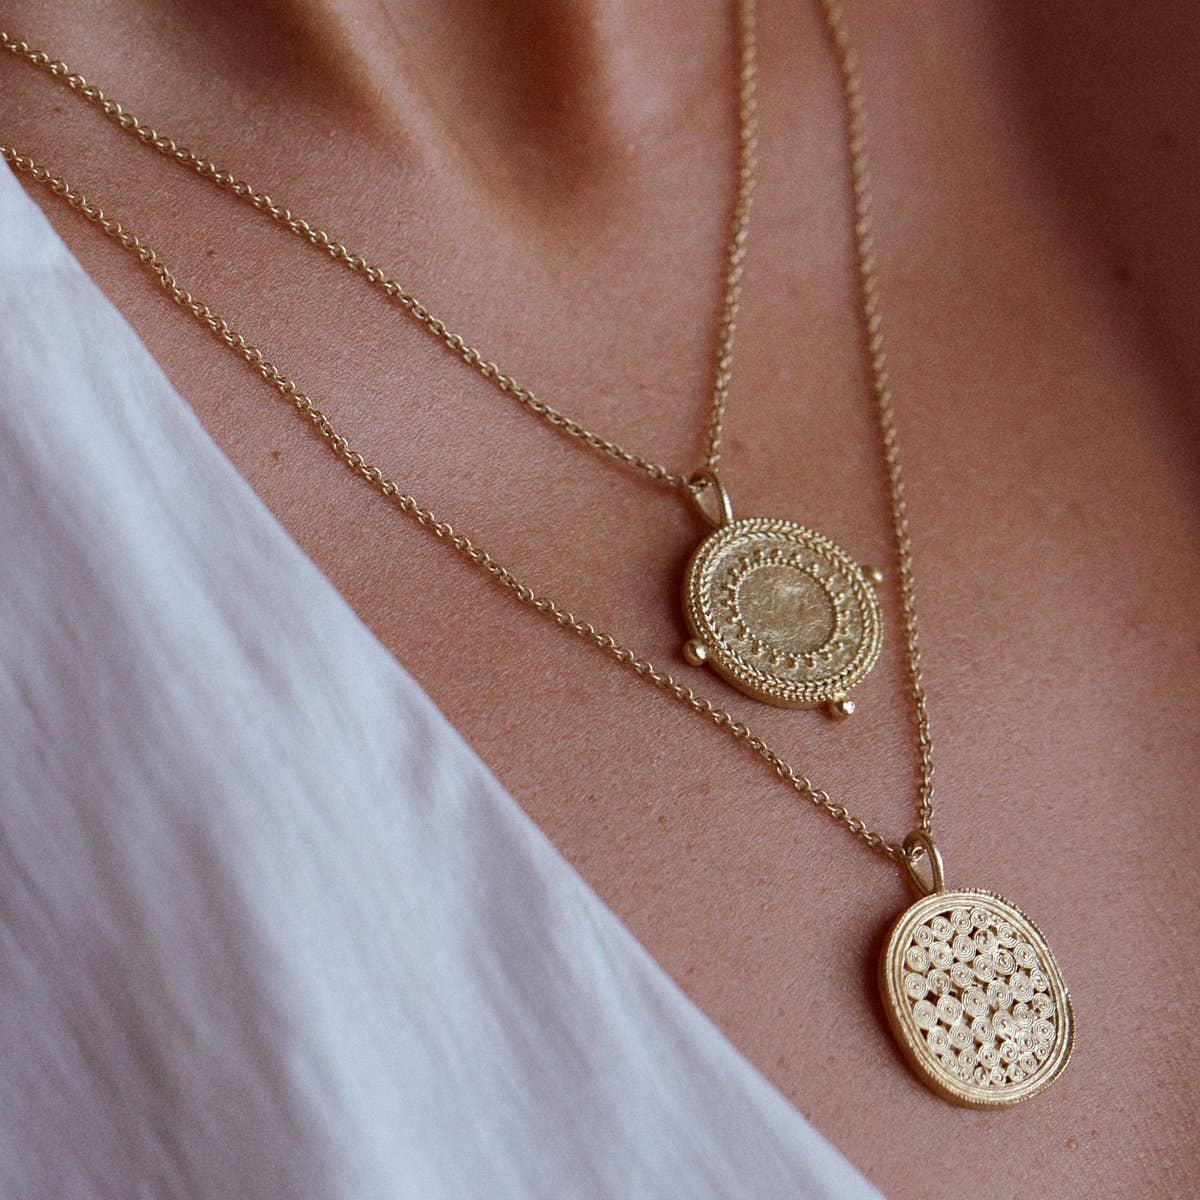 Néo Necklace | Jewelry Gold Gift Waterproof